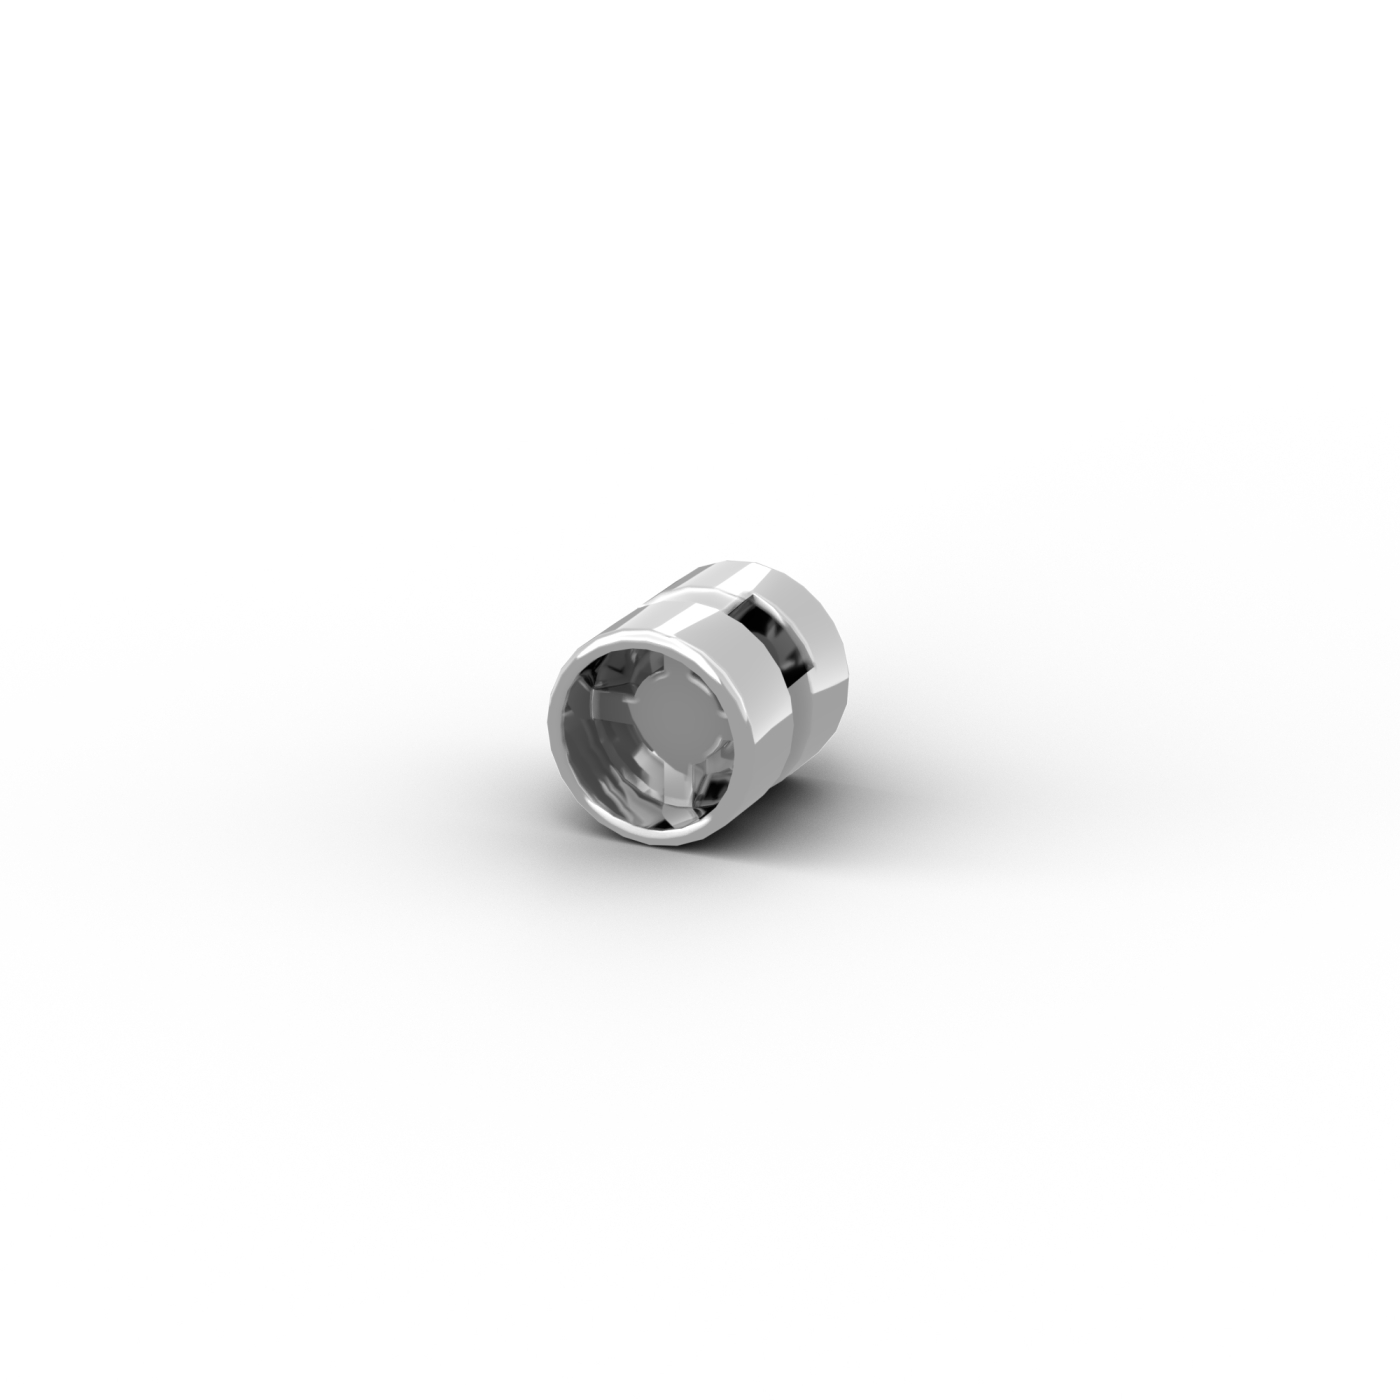 11mm D. x 12mm LEGO® wheel with hole round holder pin